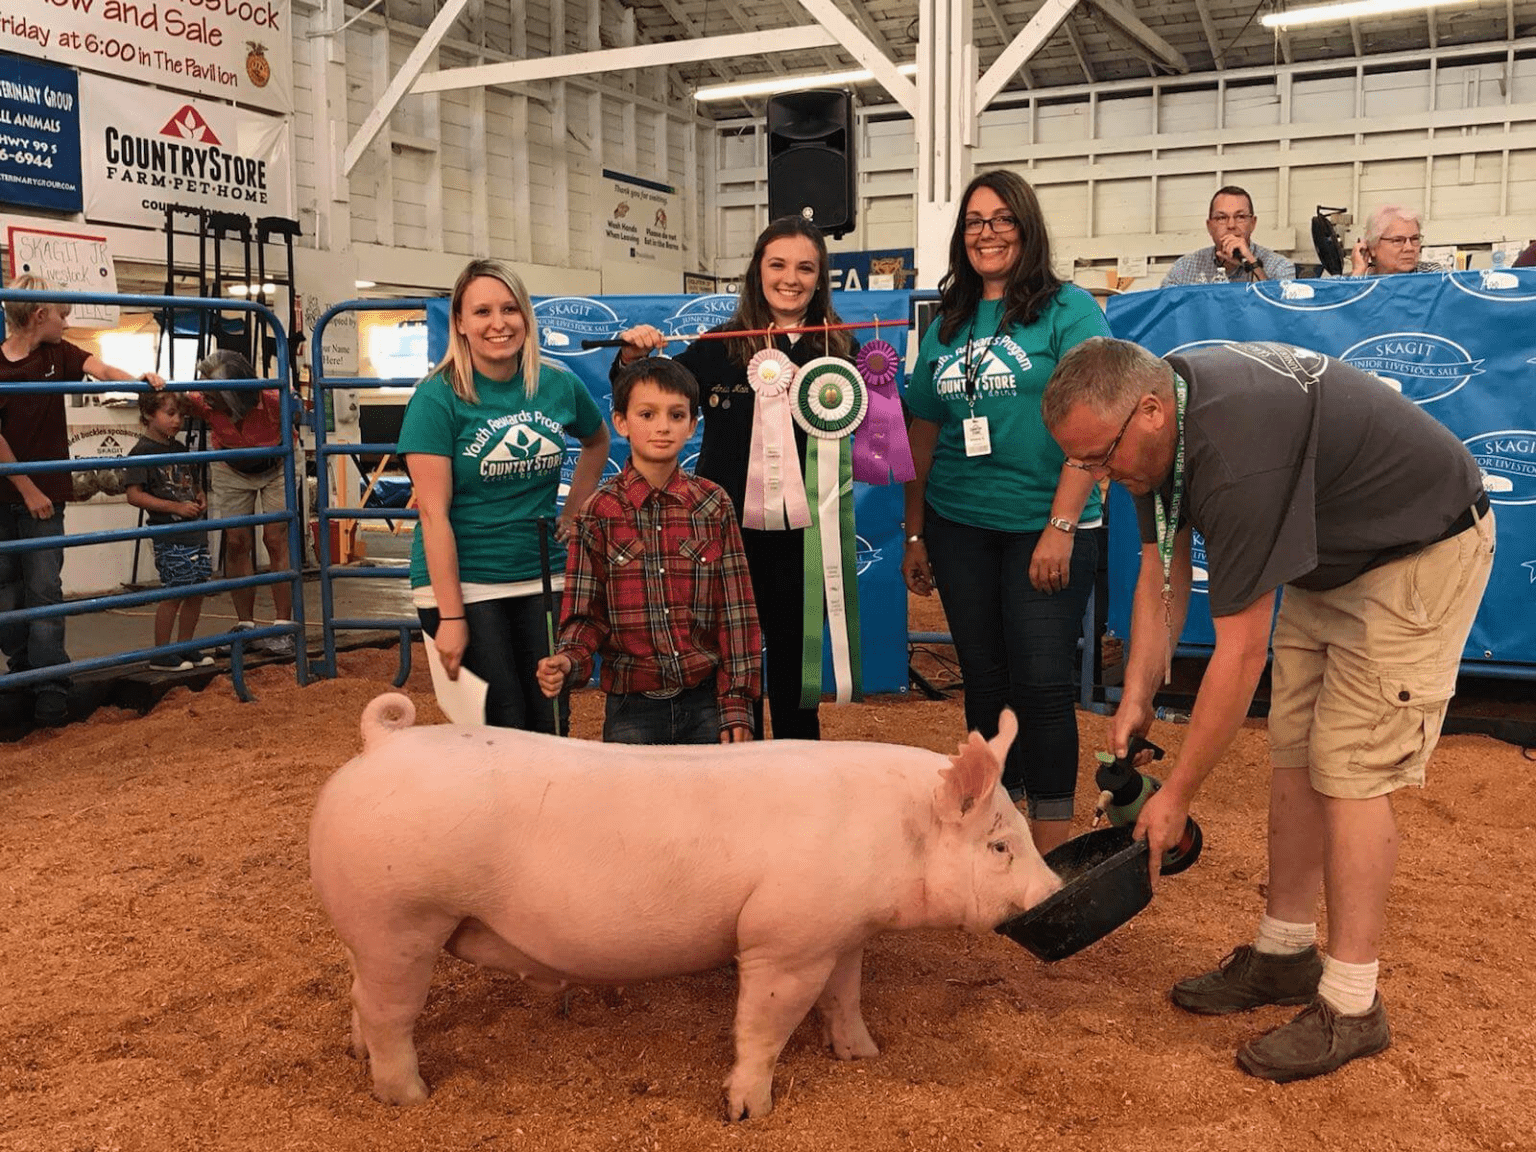 Skagit Farmers Supply's Country Store purchases a hog from the youth livestock show at the Skagit County Fair